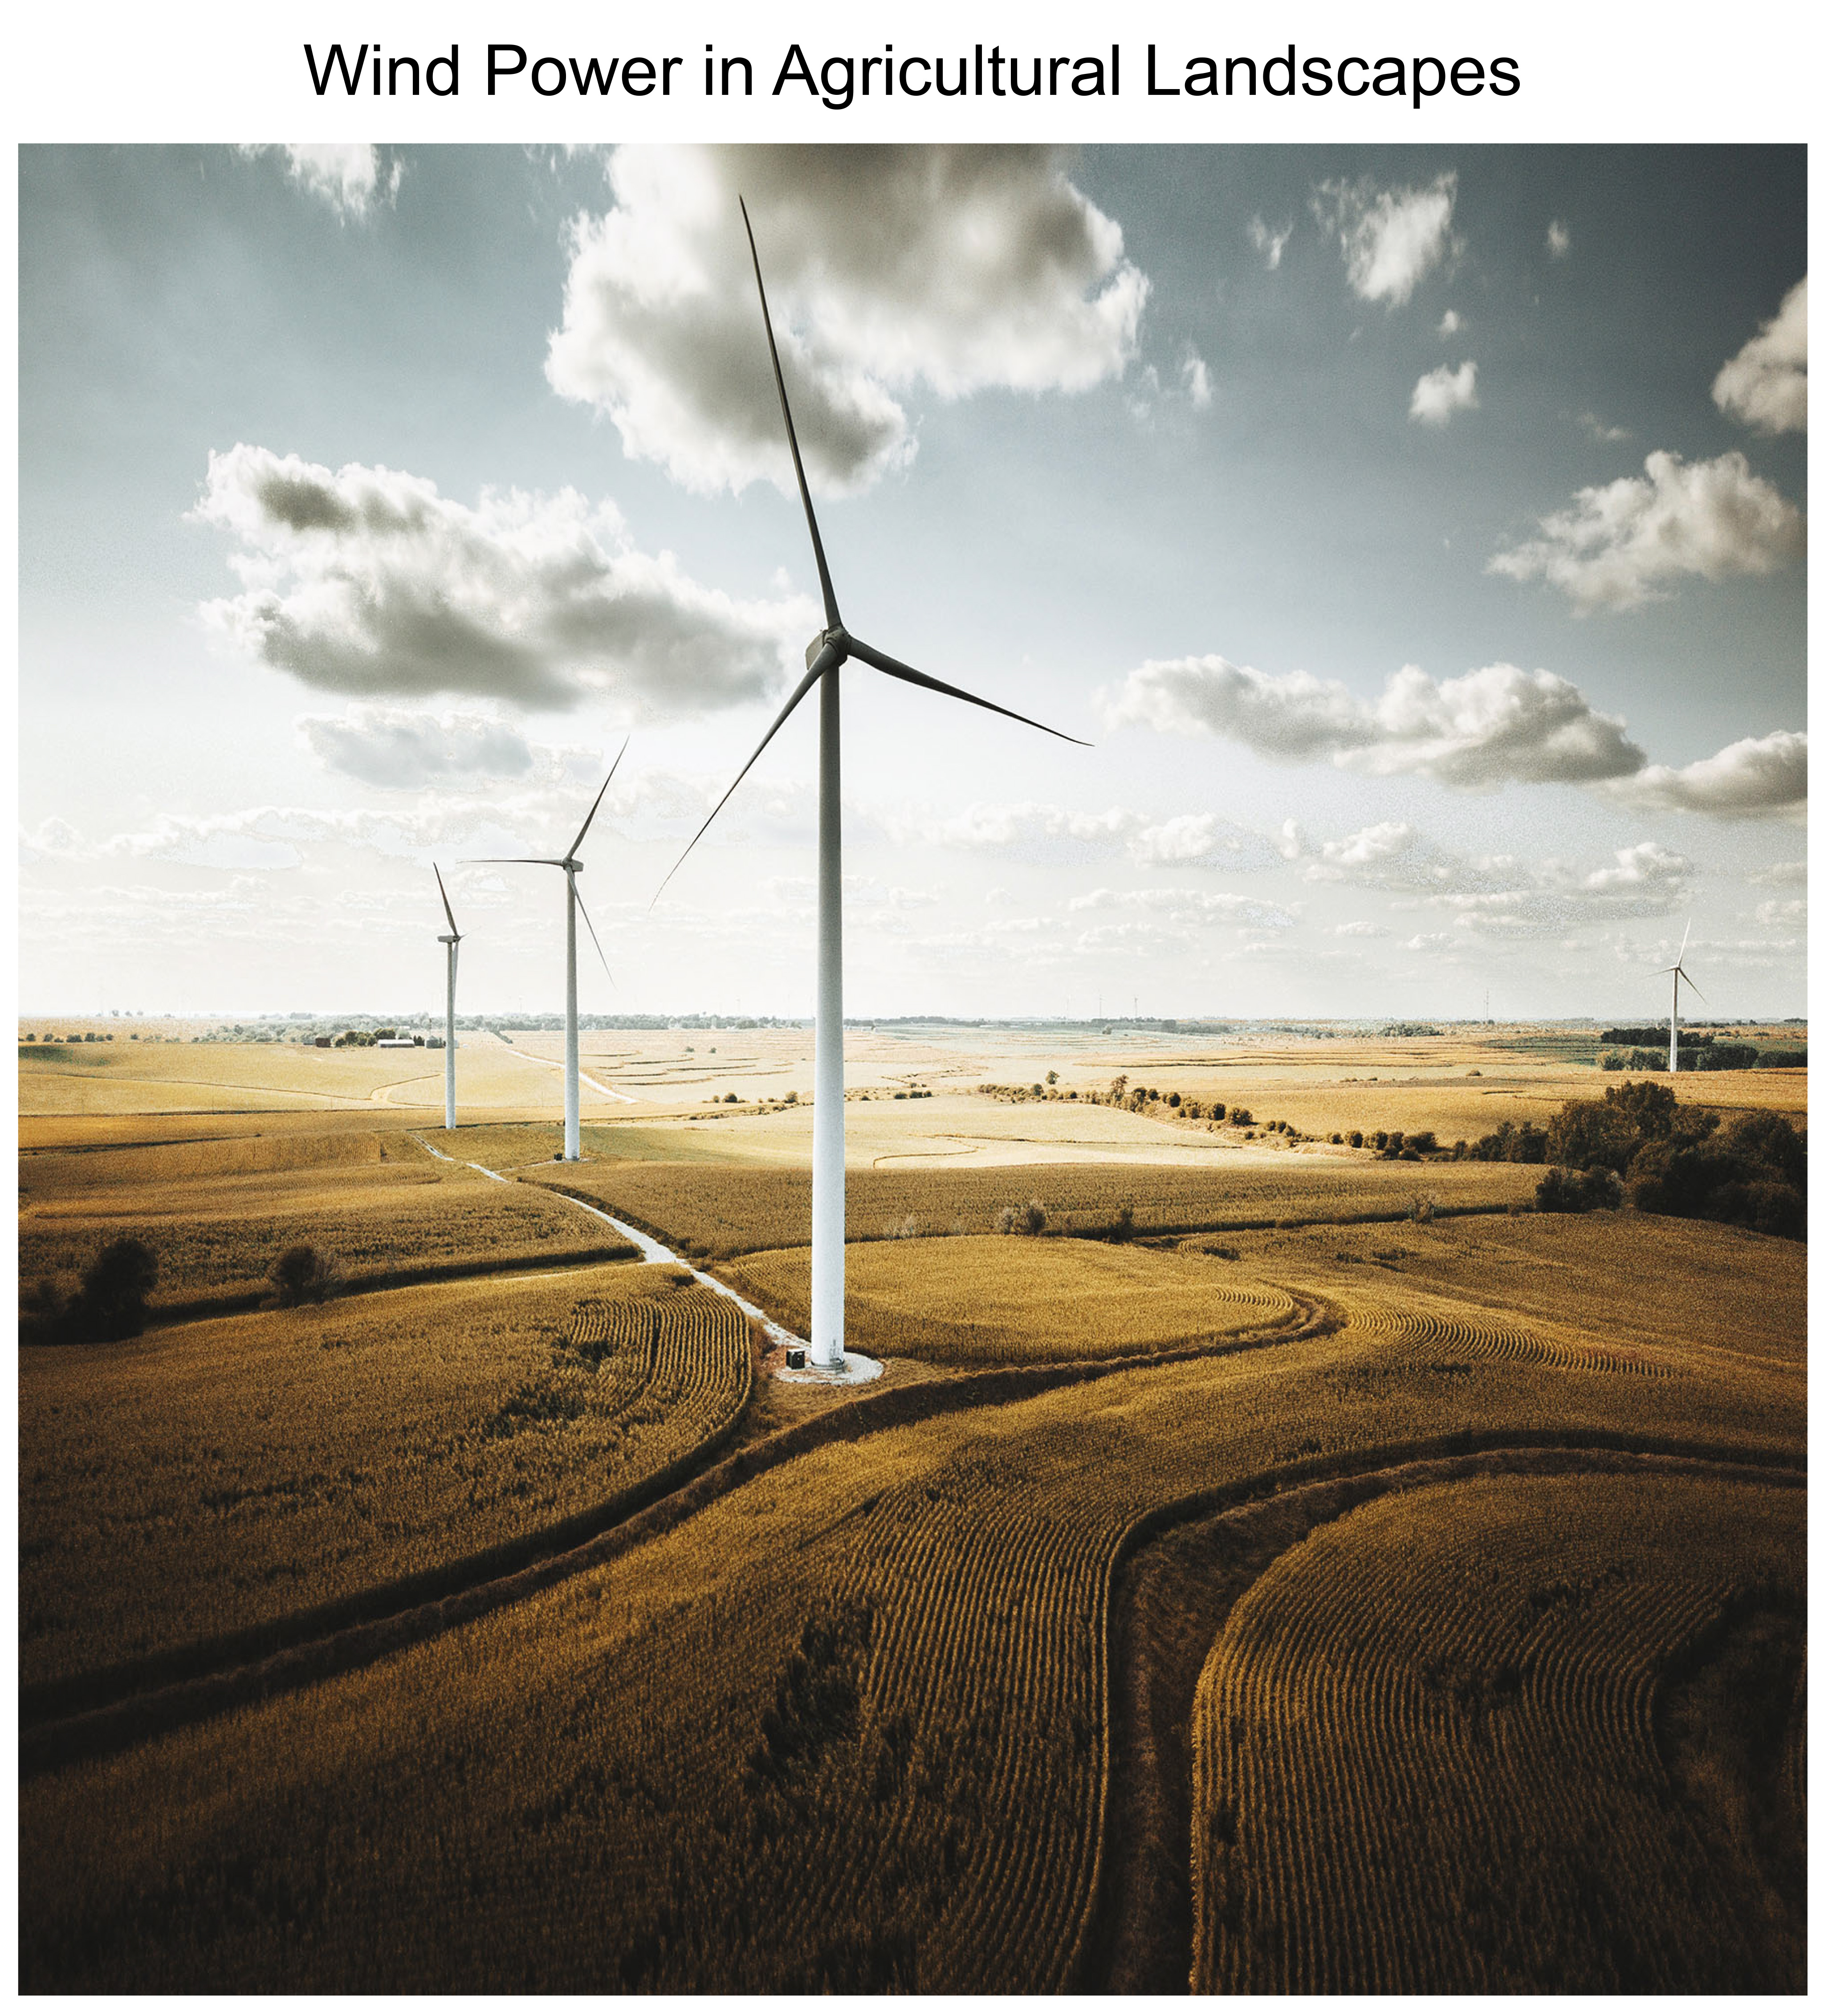 Wind Power in Agricultural Landscapes